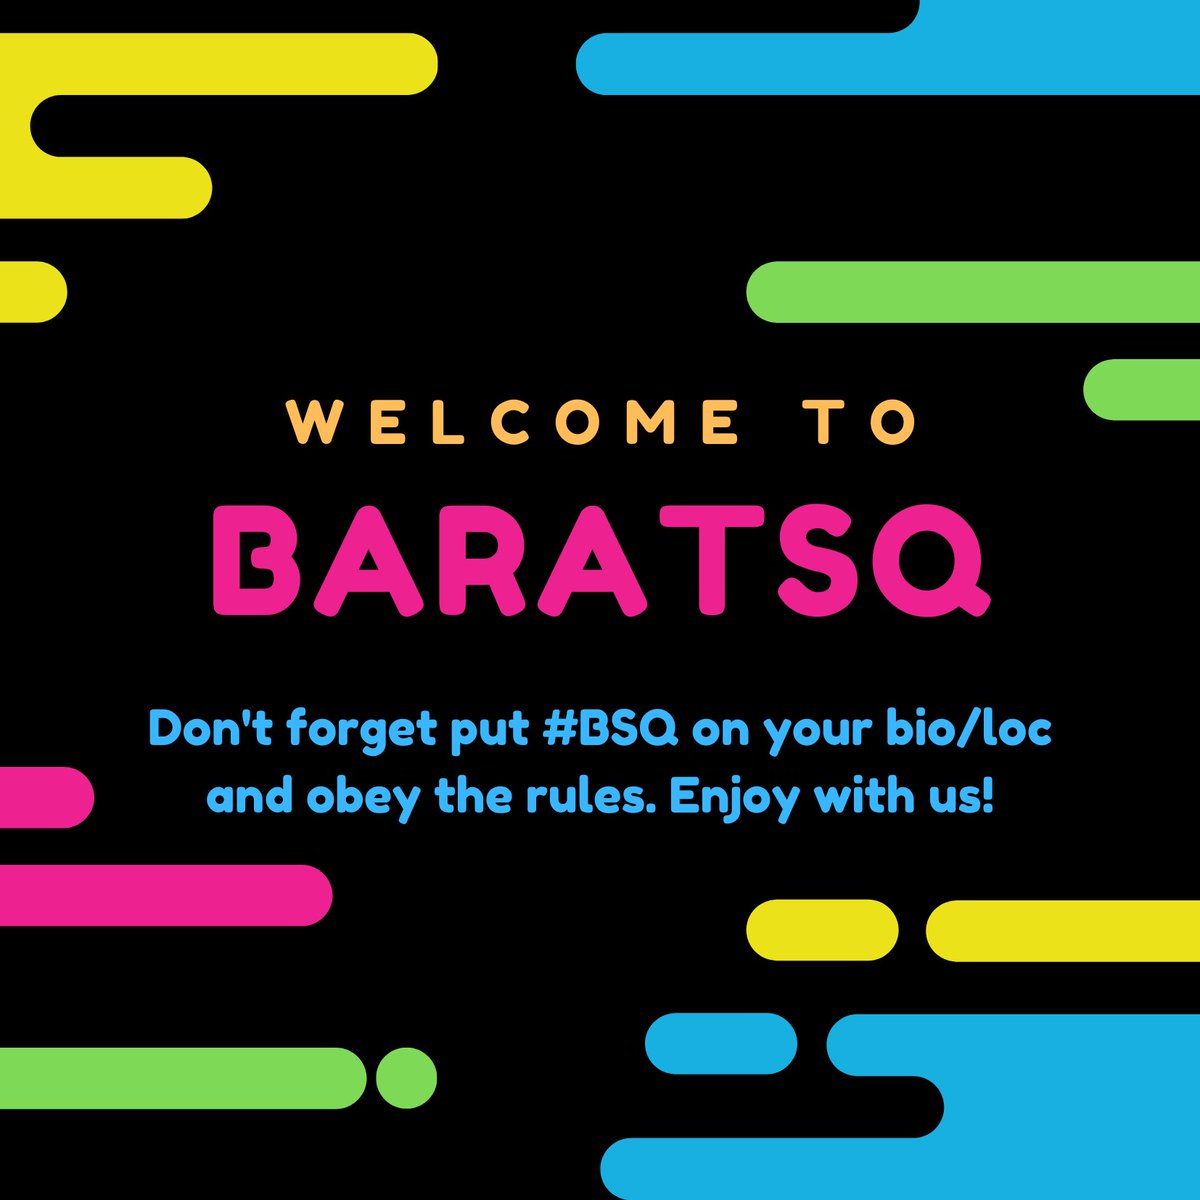 ╭`🕊 Beep-beep!
— you have a new message.💌

❝ Dear, @detexted @gouddesz

—Congratulation you're verified. — Welcome to BARATSQ! 🎆

— Keep active and obey the rules, don't forget put #BSQ on your bio/loc. Enjoy with us! ❞╯